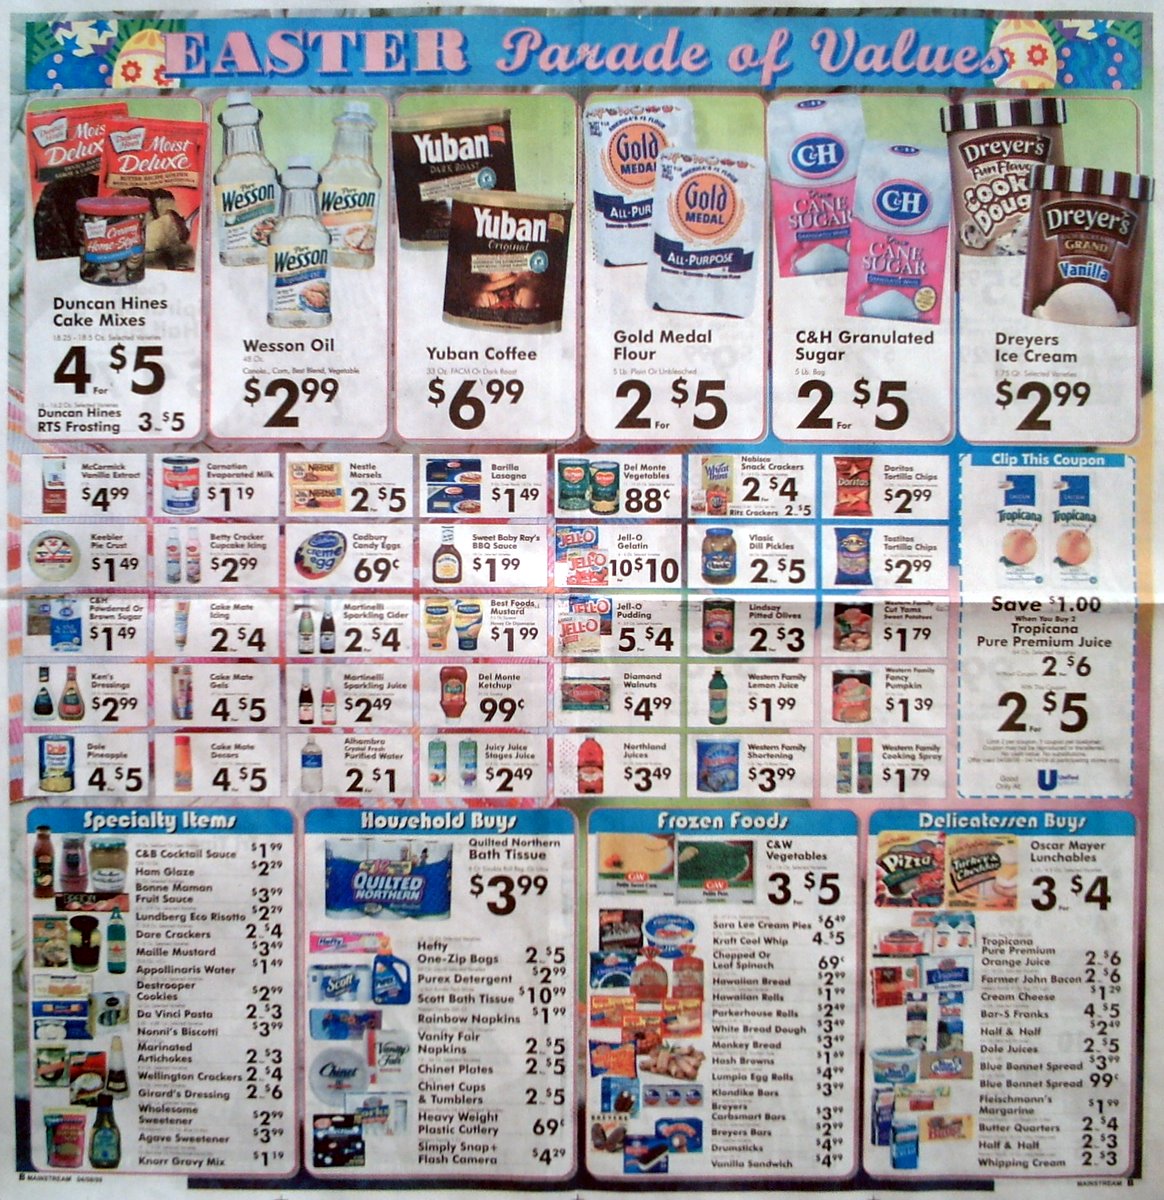 Big Trees Market Weekly Ad for April 8-14, 2009